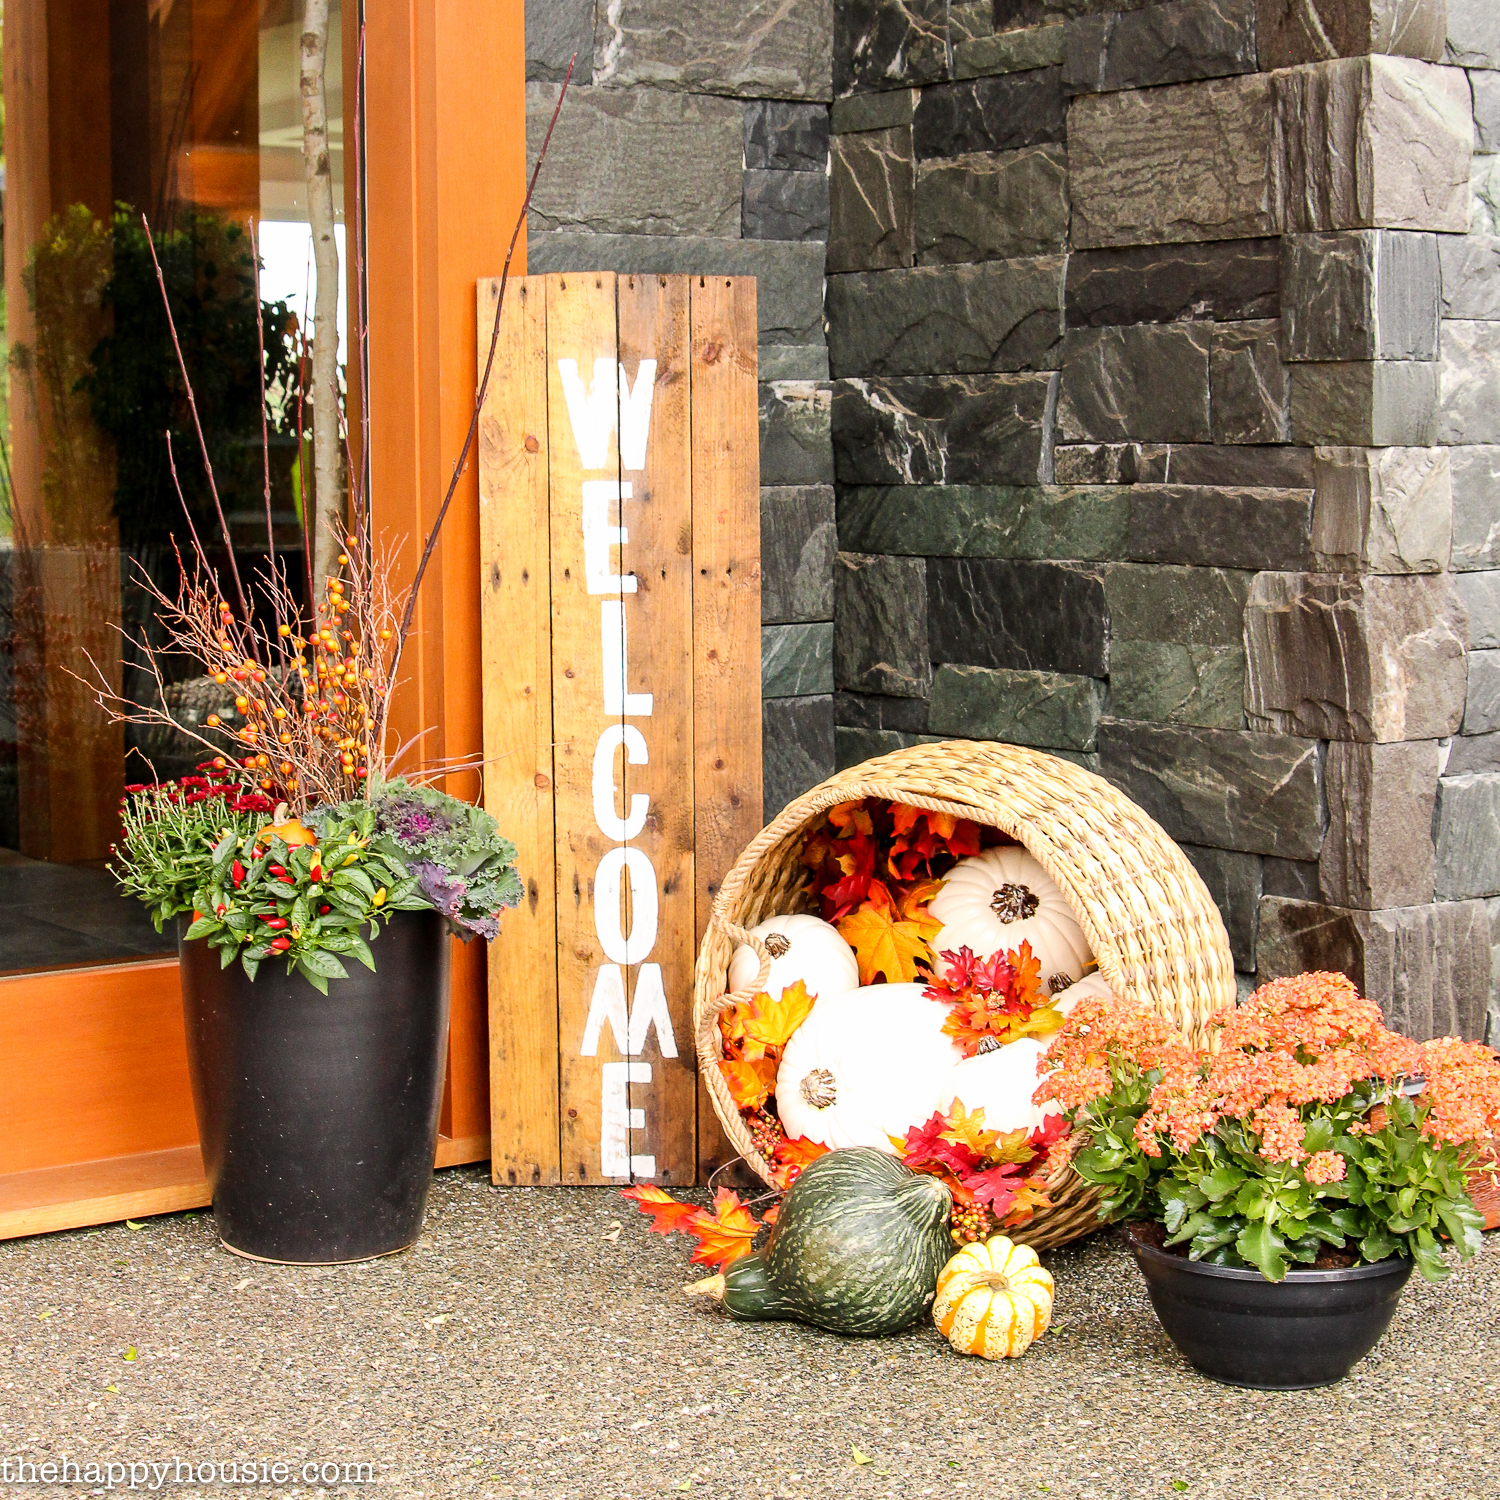 Floral planters and a basket filled with fall decor on the porch.